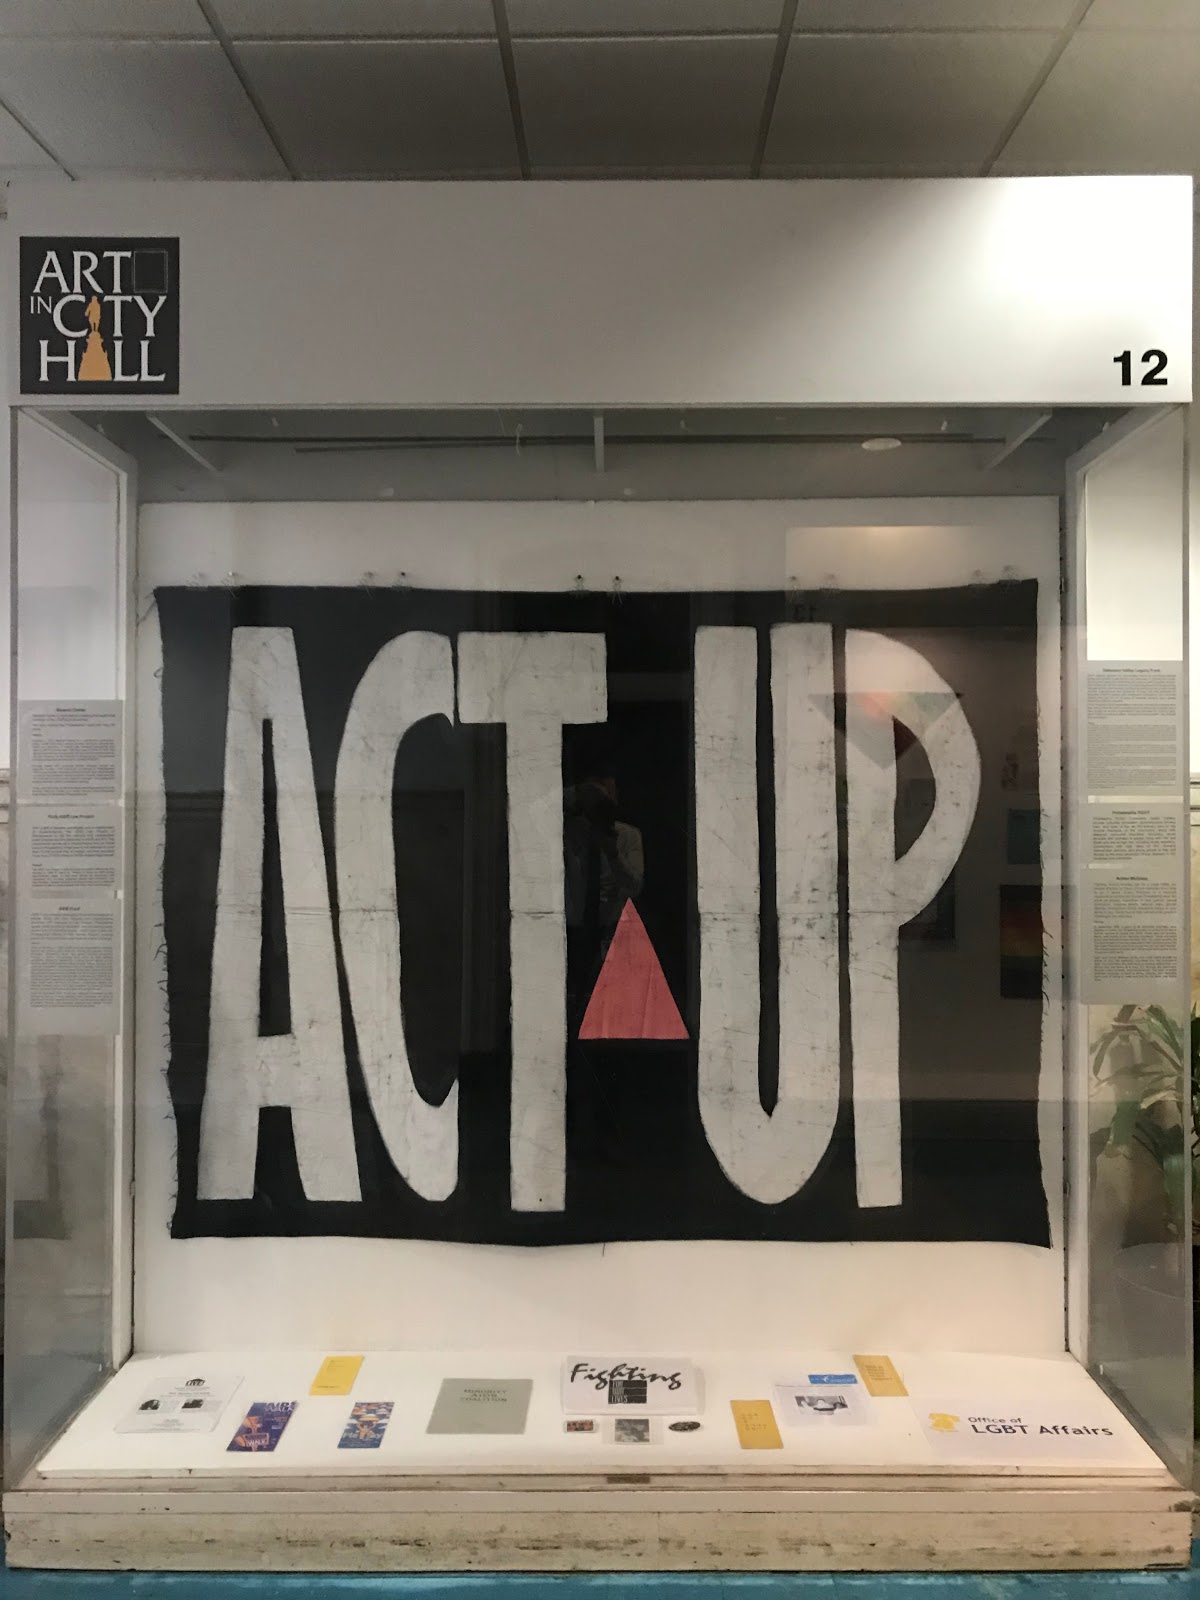 art exhibit in city hall showing different lgbtq artifacts including a large "act up" banner